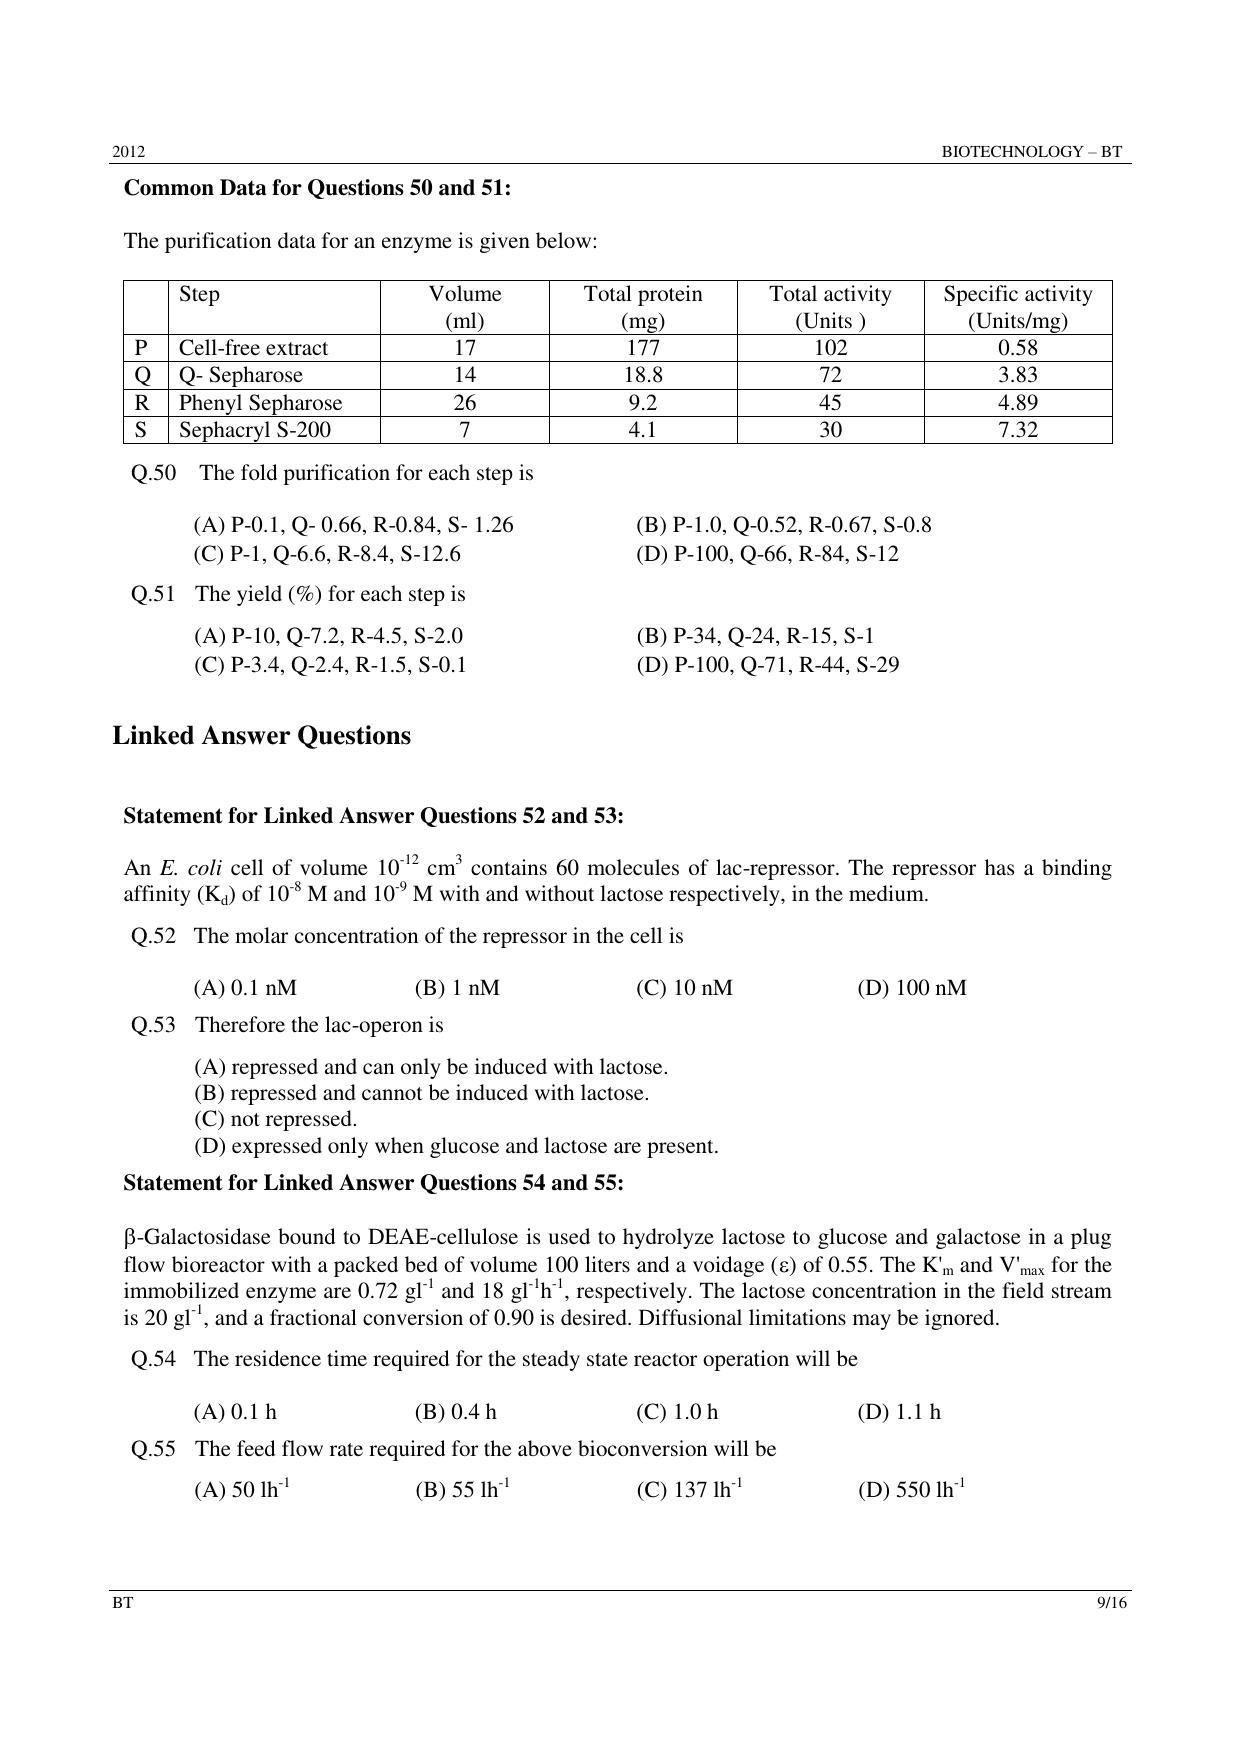 GATE 2012 Biotechnology (BT) Question Paper with Answer Key - Page 9